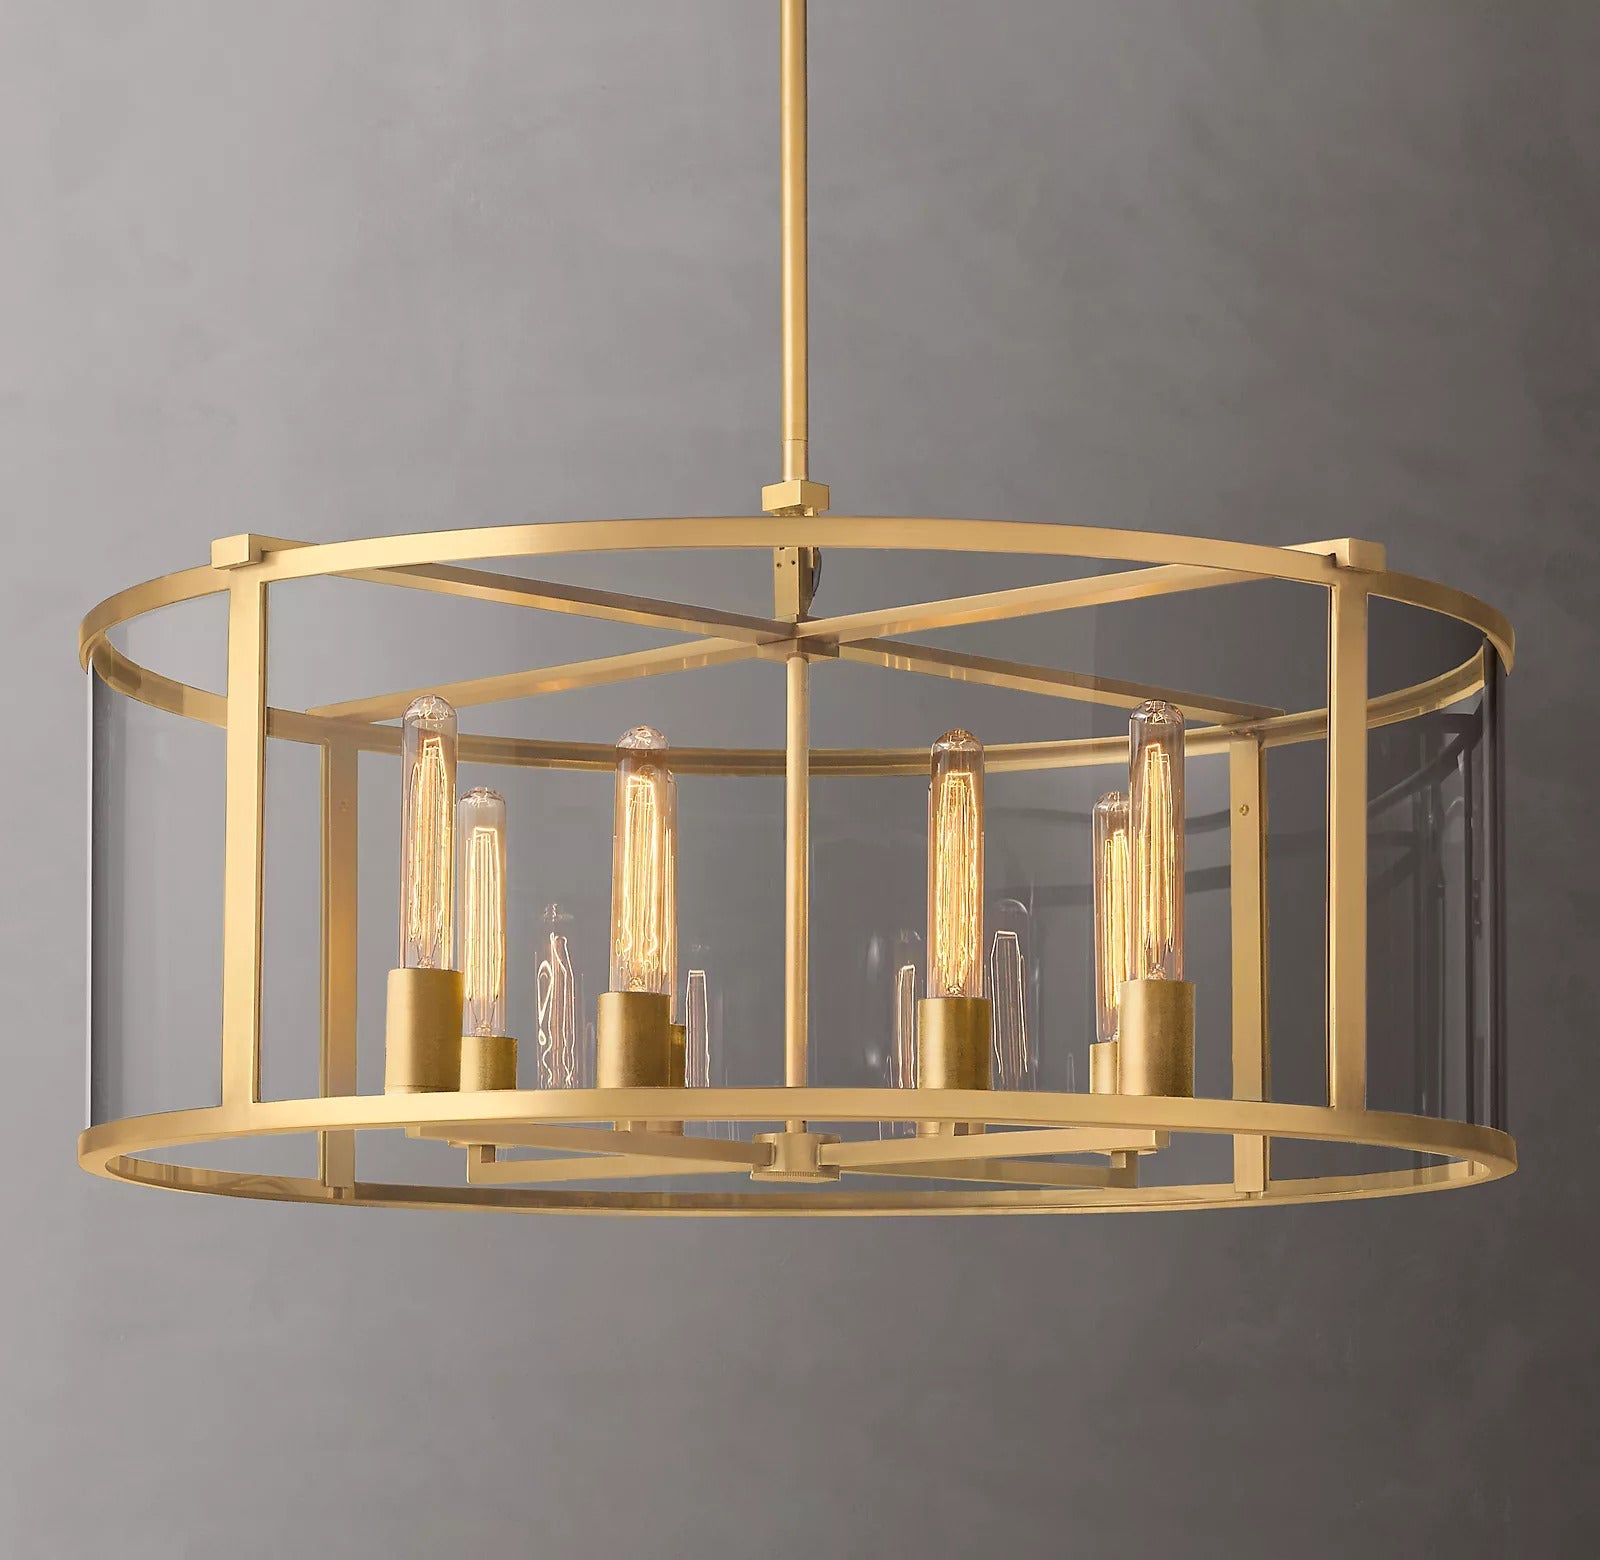 Michael Beck Round Chandelier 33" For Living Room